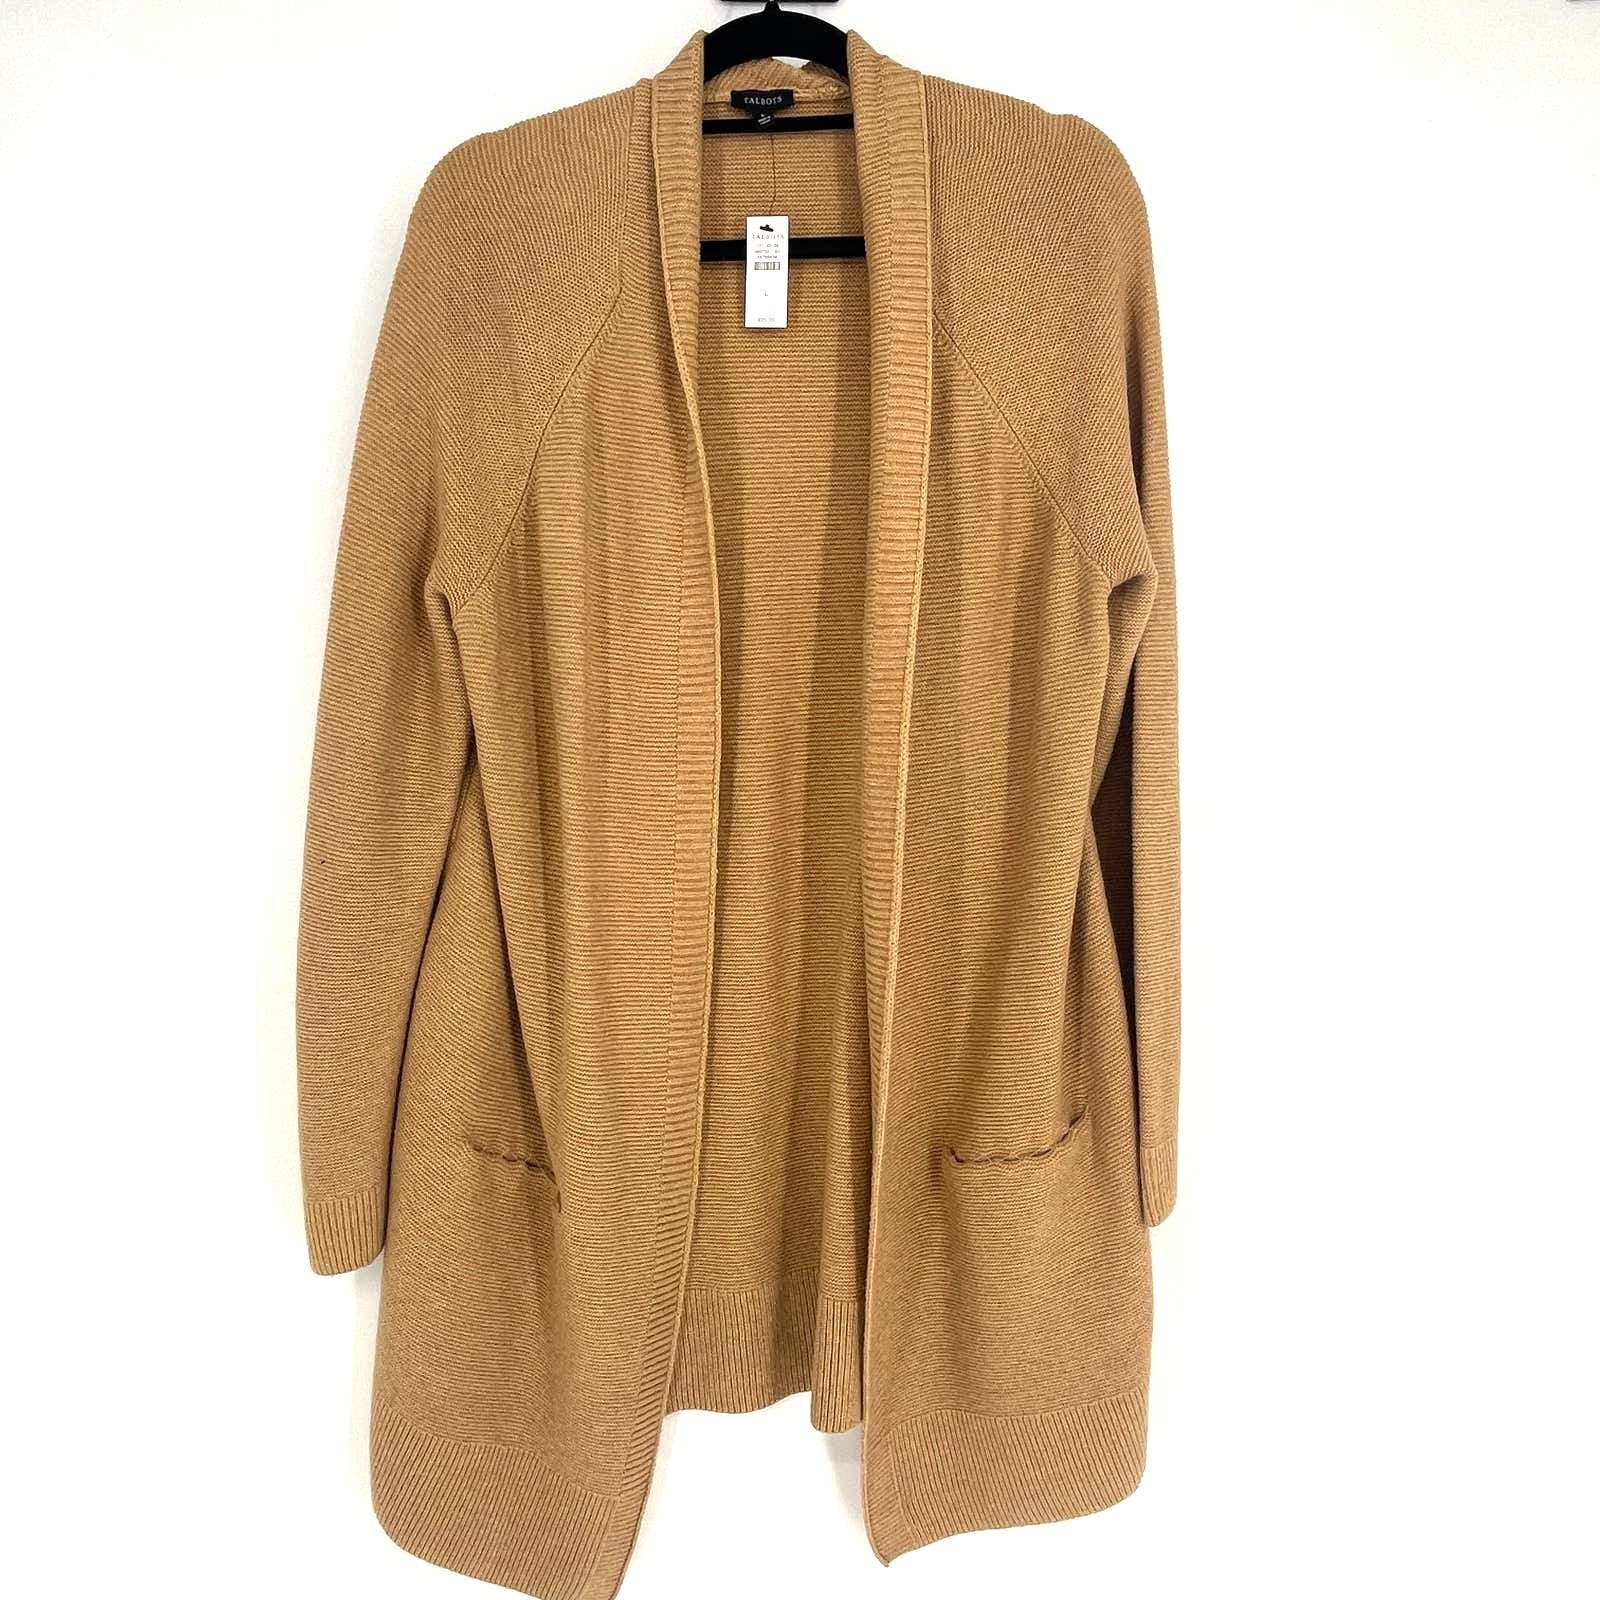 Special offer  Talbots Open Cardigan Size L NWT $99 pBO